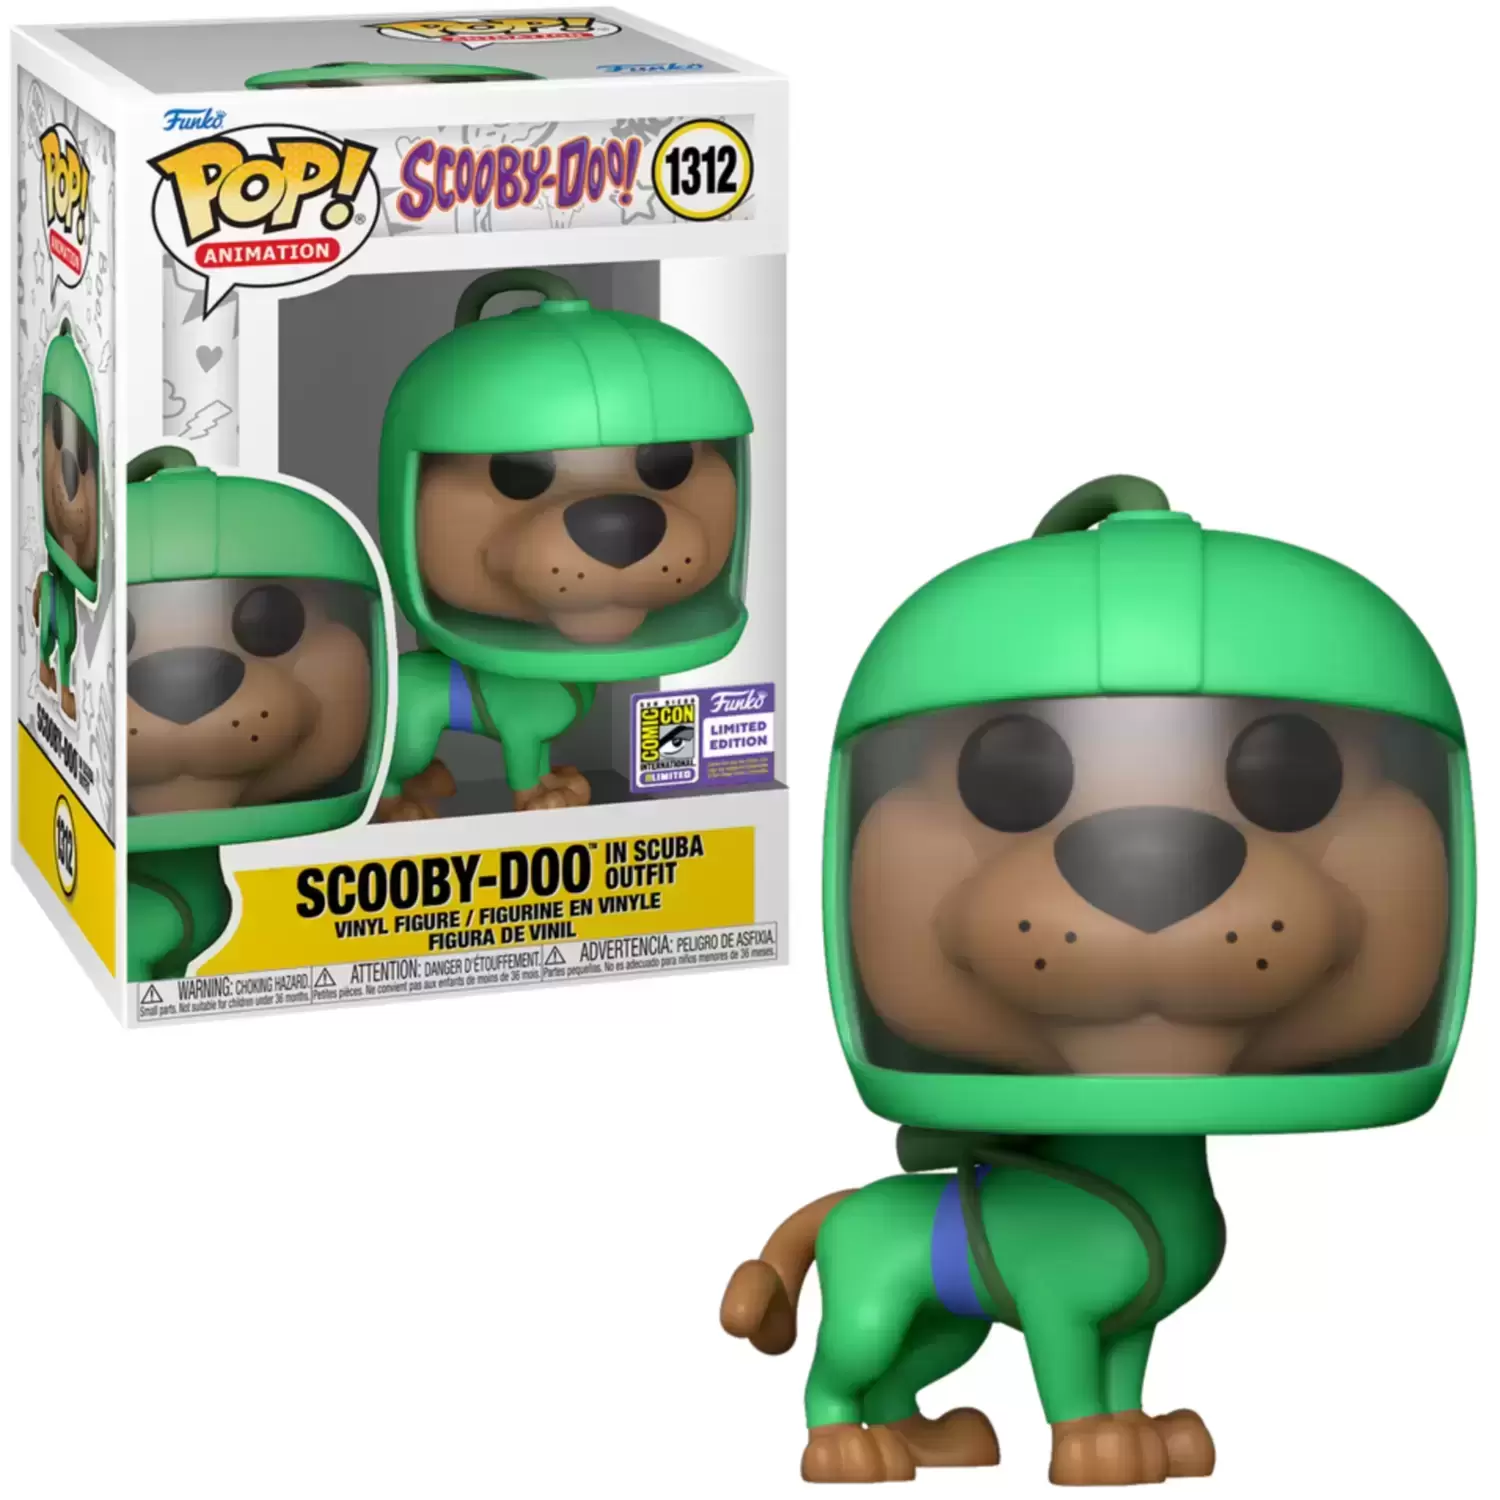 POP! Animation - Scooby-Doo - Scooby-Doo in Scuba Outfit